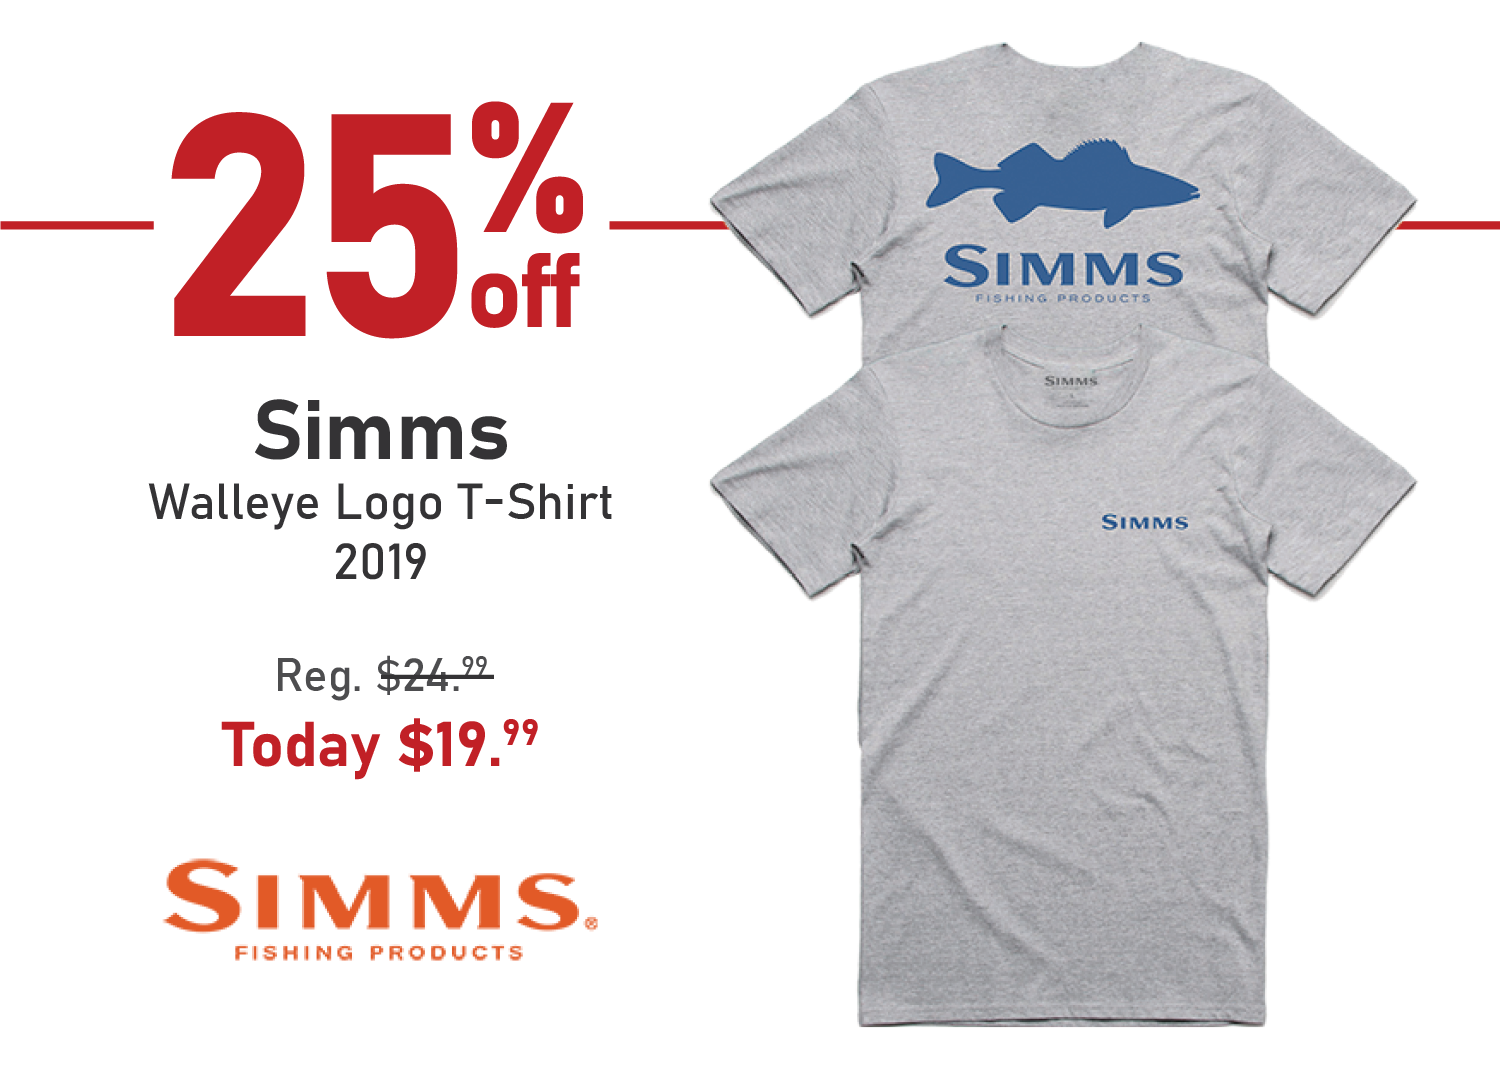 Save 25% on the Simms Walleye Logo T-Shirt - 2019